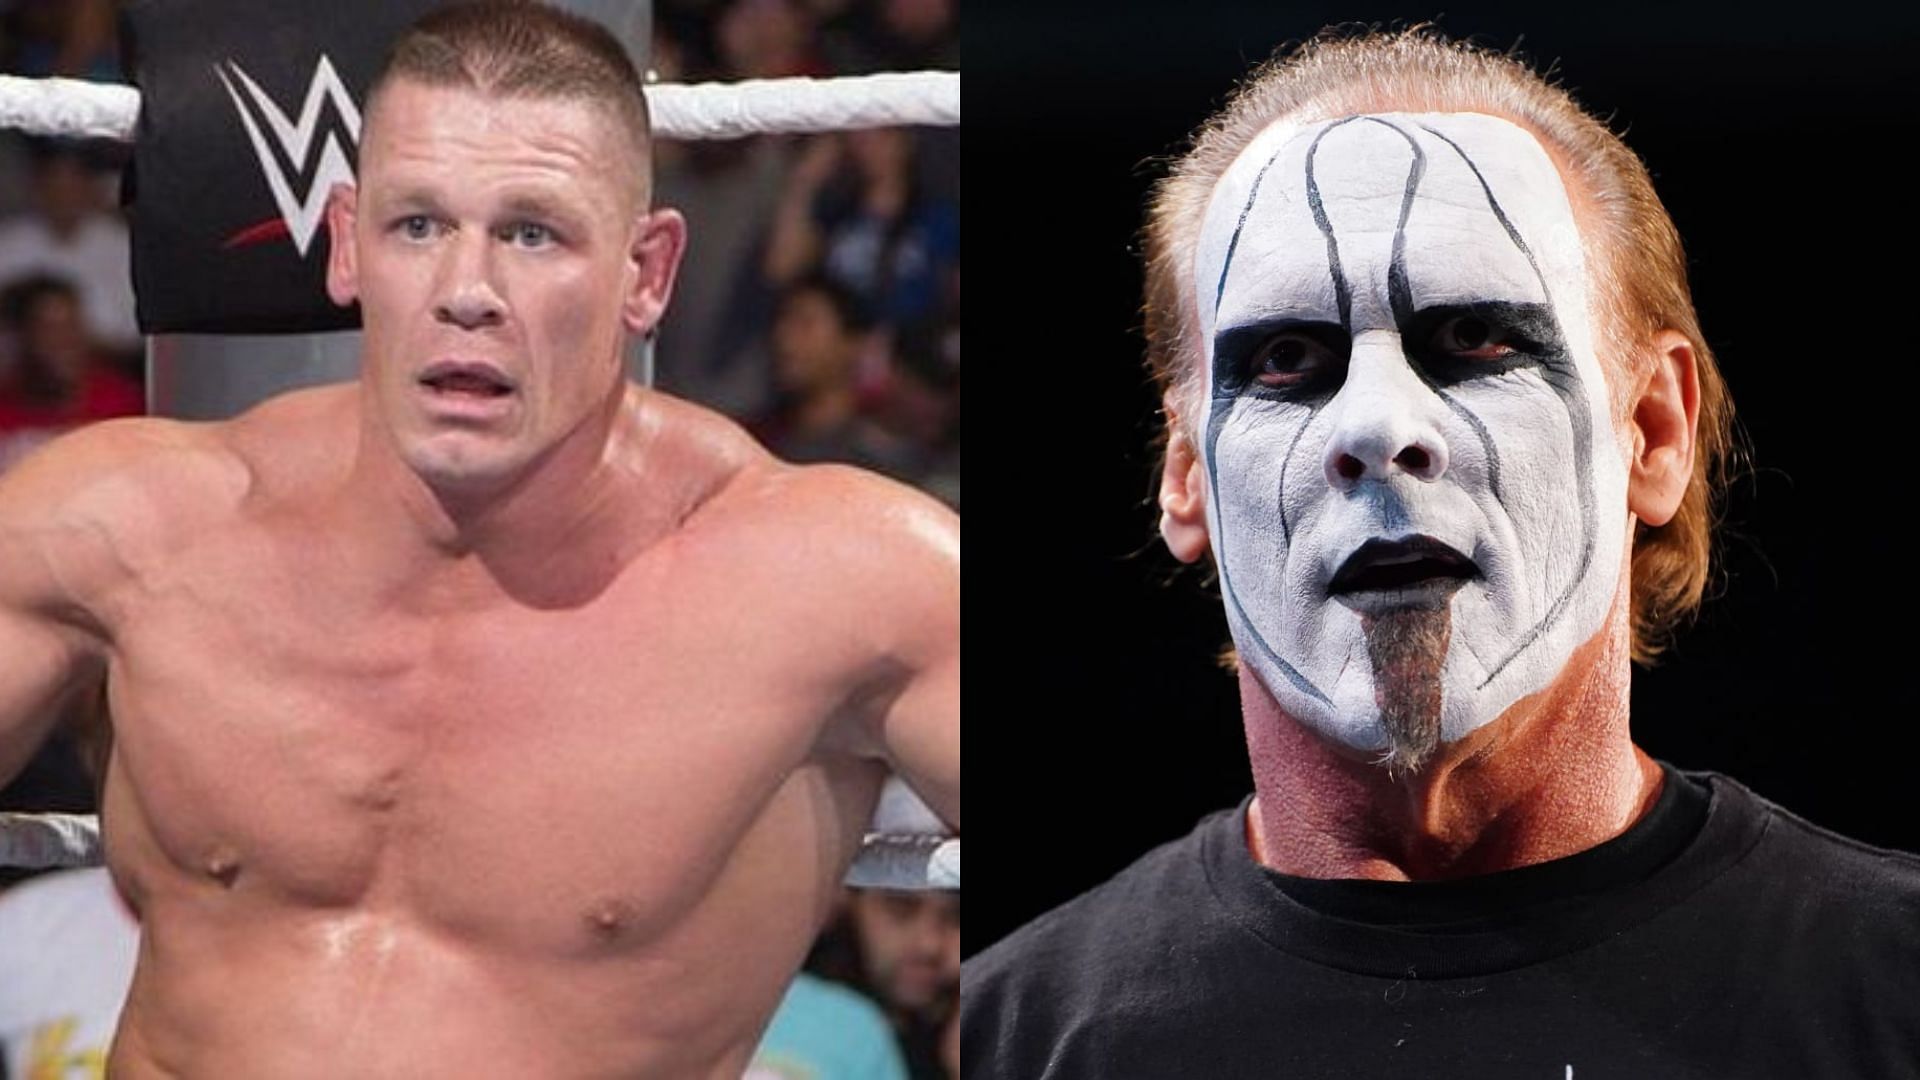 These WWE legends refused to lay down for current AEW stars